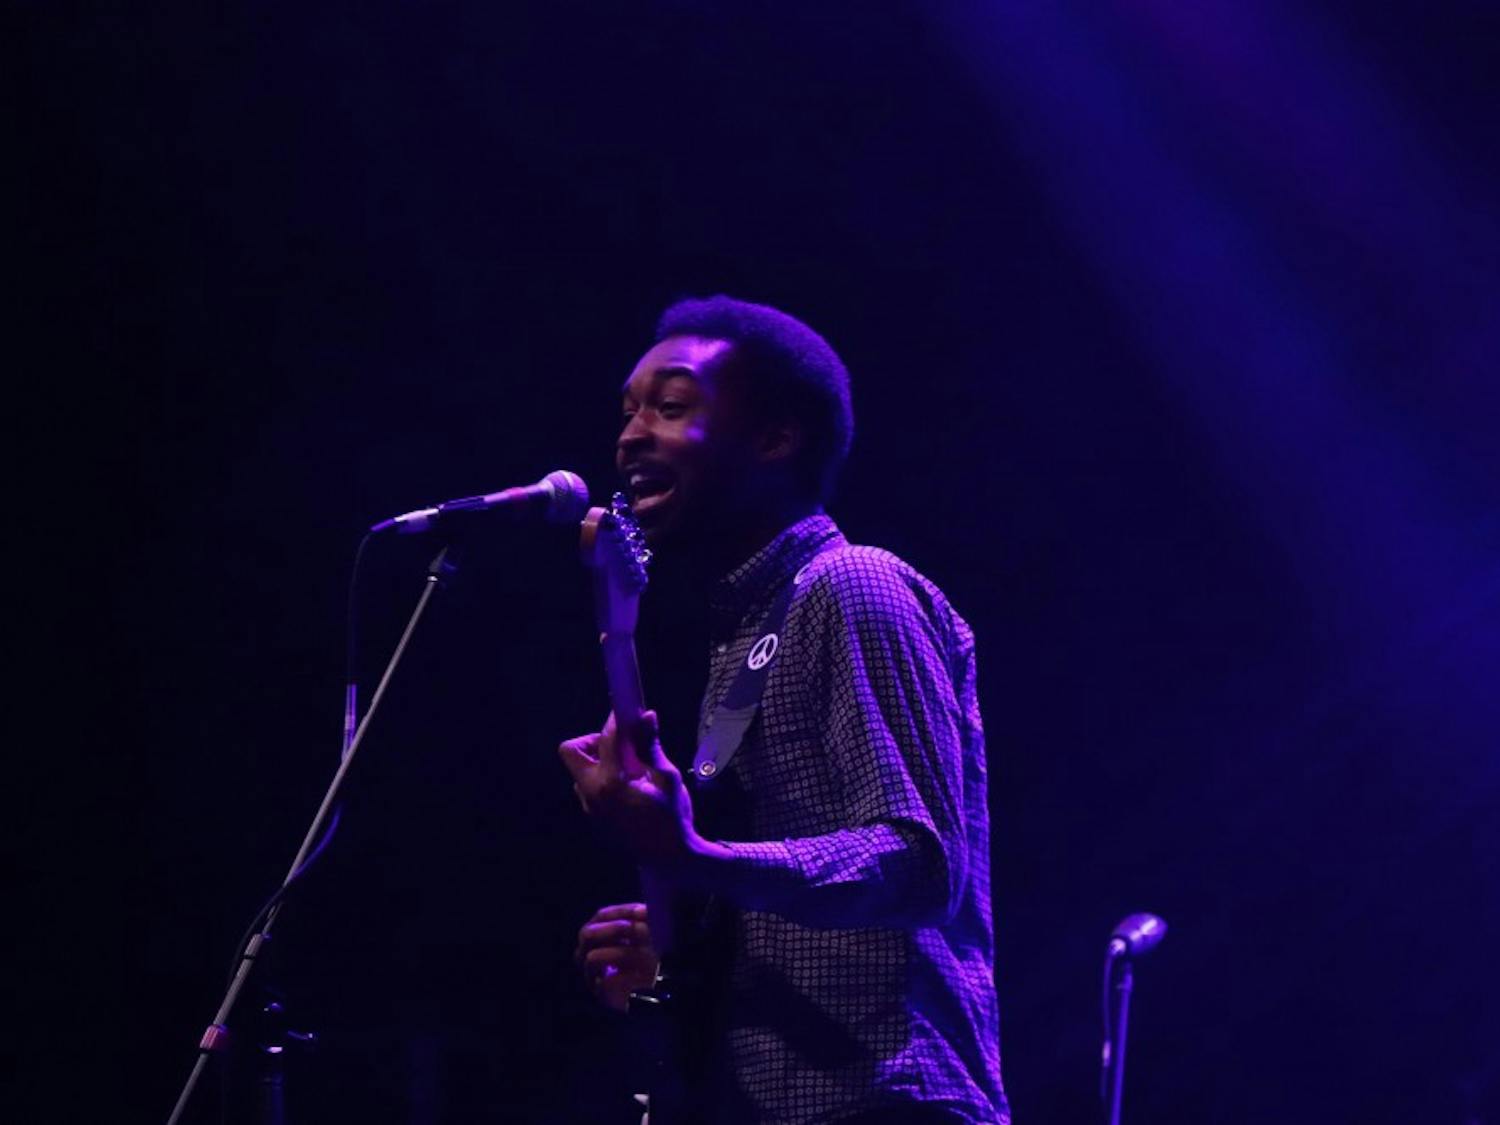 The show opened with Jalen N’Gonda, above, an up-and-comer on the music scene who delivered major groove with his set.